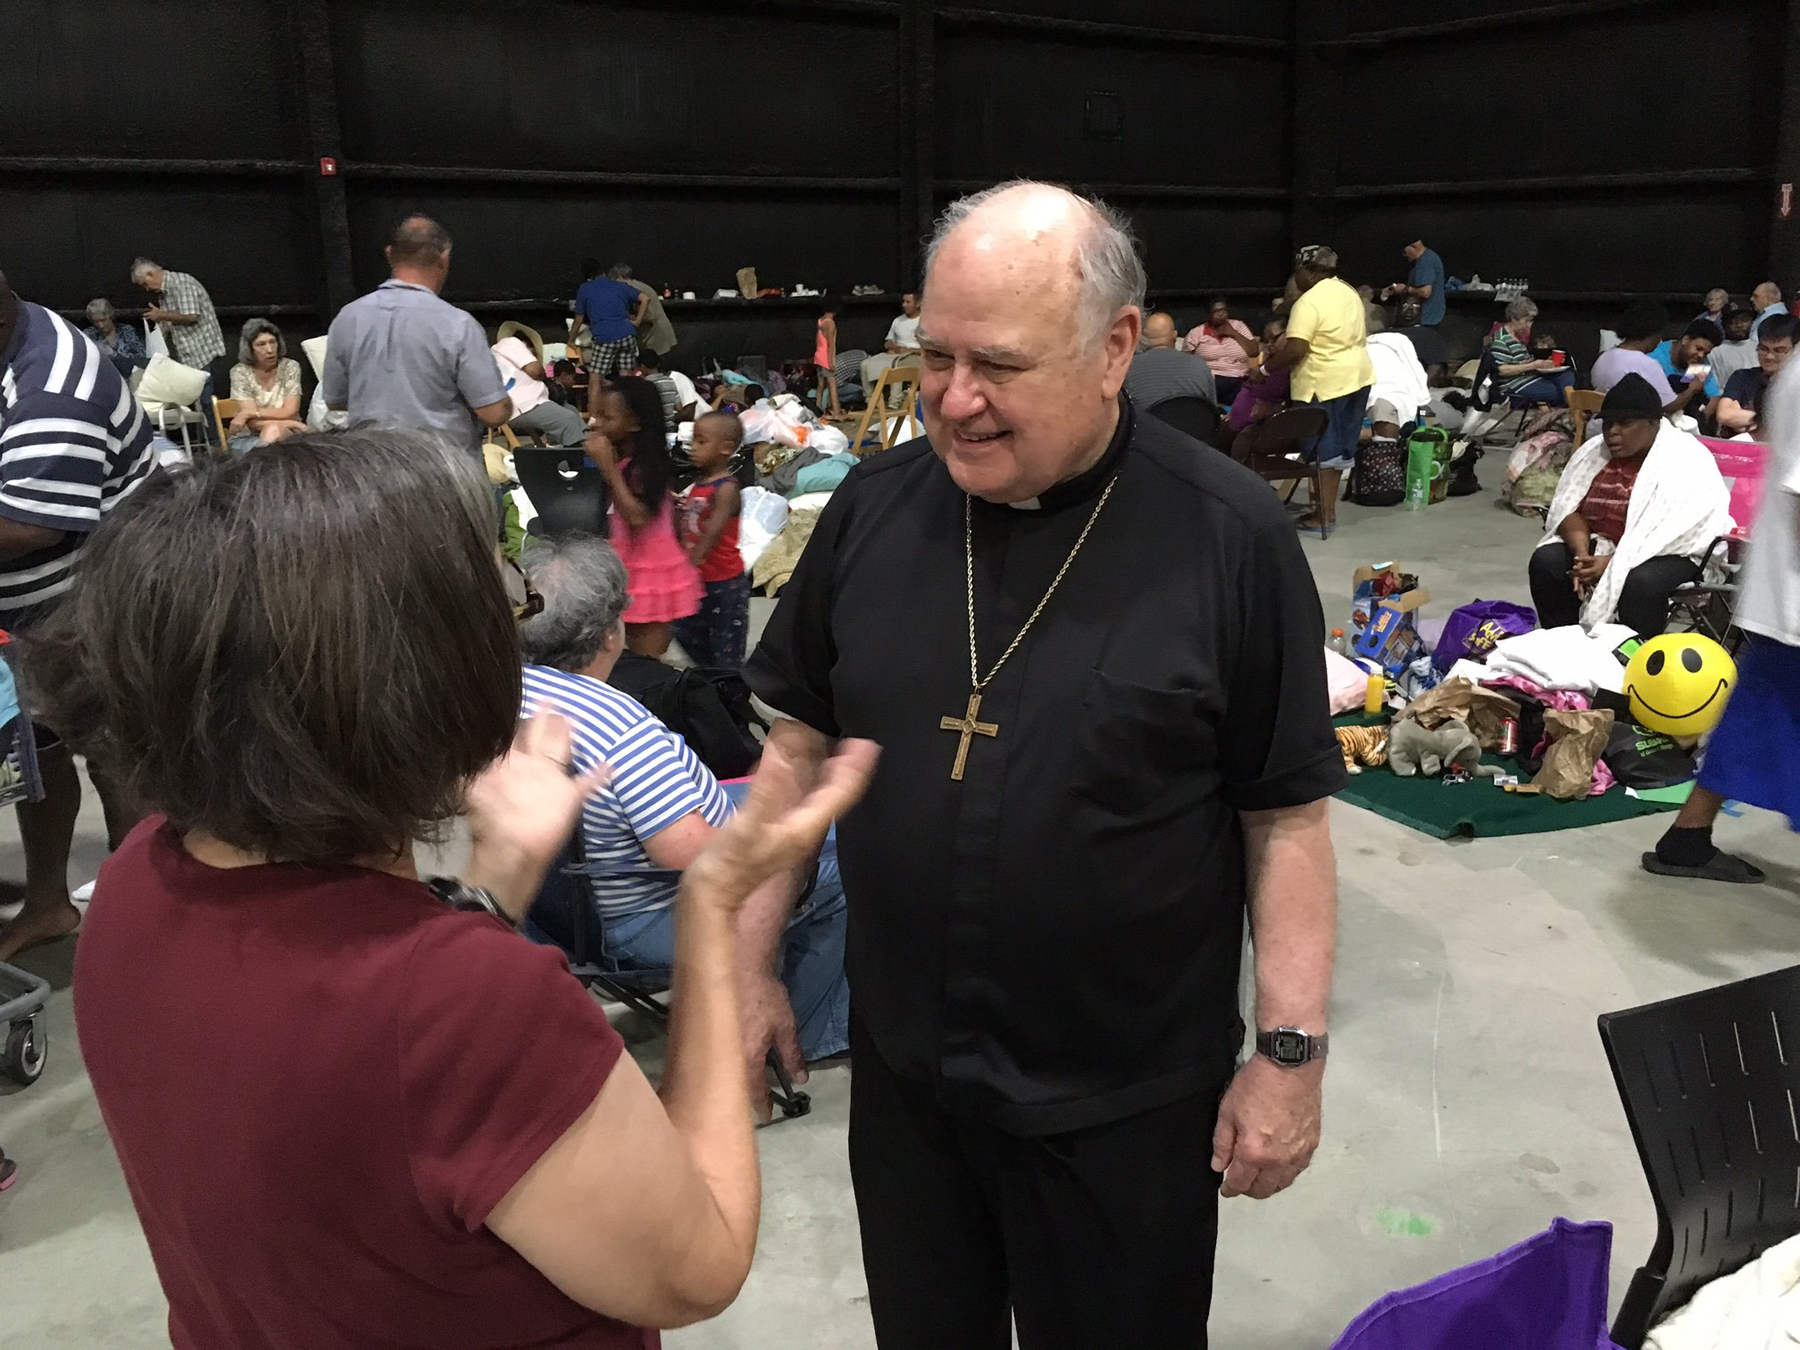 Bishop Robert W. Muench of Baton Rouge, La., visits an evacuation shelter Aug. 14. Thousands of people in the Diocese of Baton Rouge have been displaced because of extreme flooding. (CNS photo/courtesy Father Paul Yi)